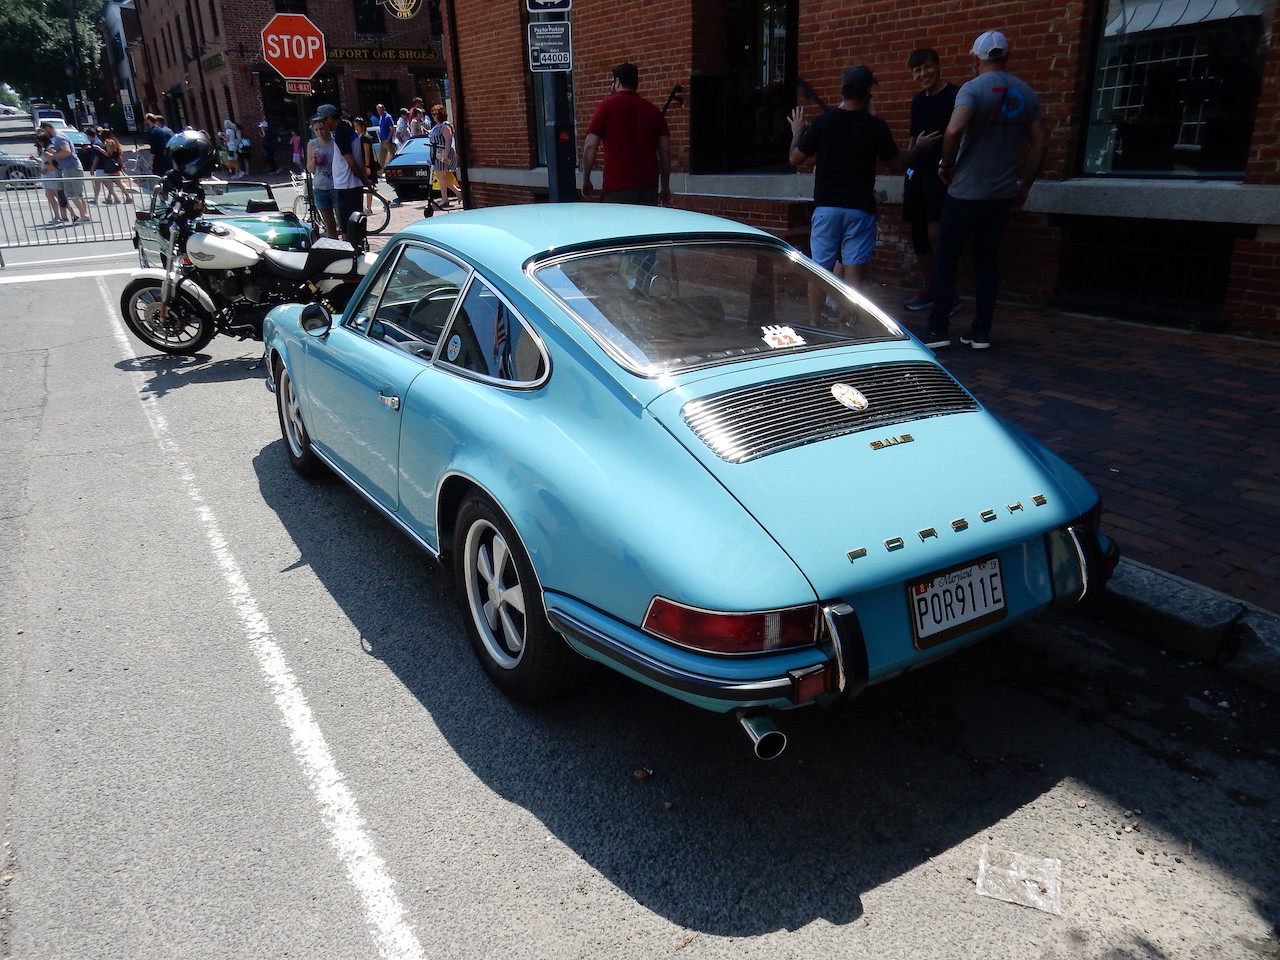 The Porsche 911 E from the B series of the first generation which was introduced in 1969 were powered by flat-six engines with displacement between 2,0 and 2,4 litres